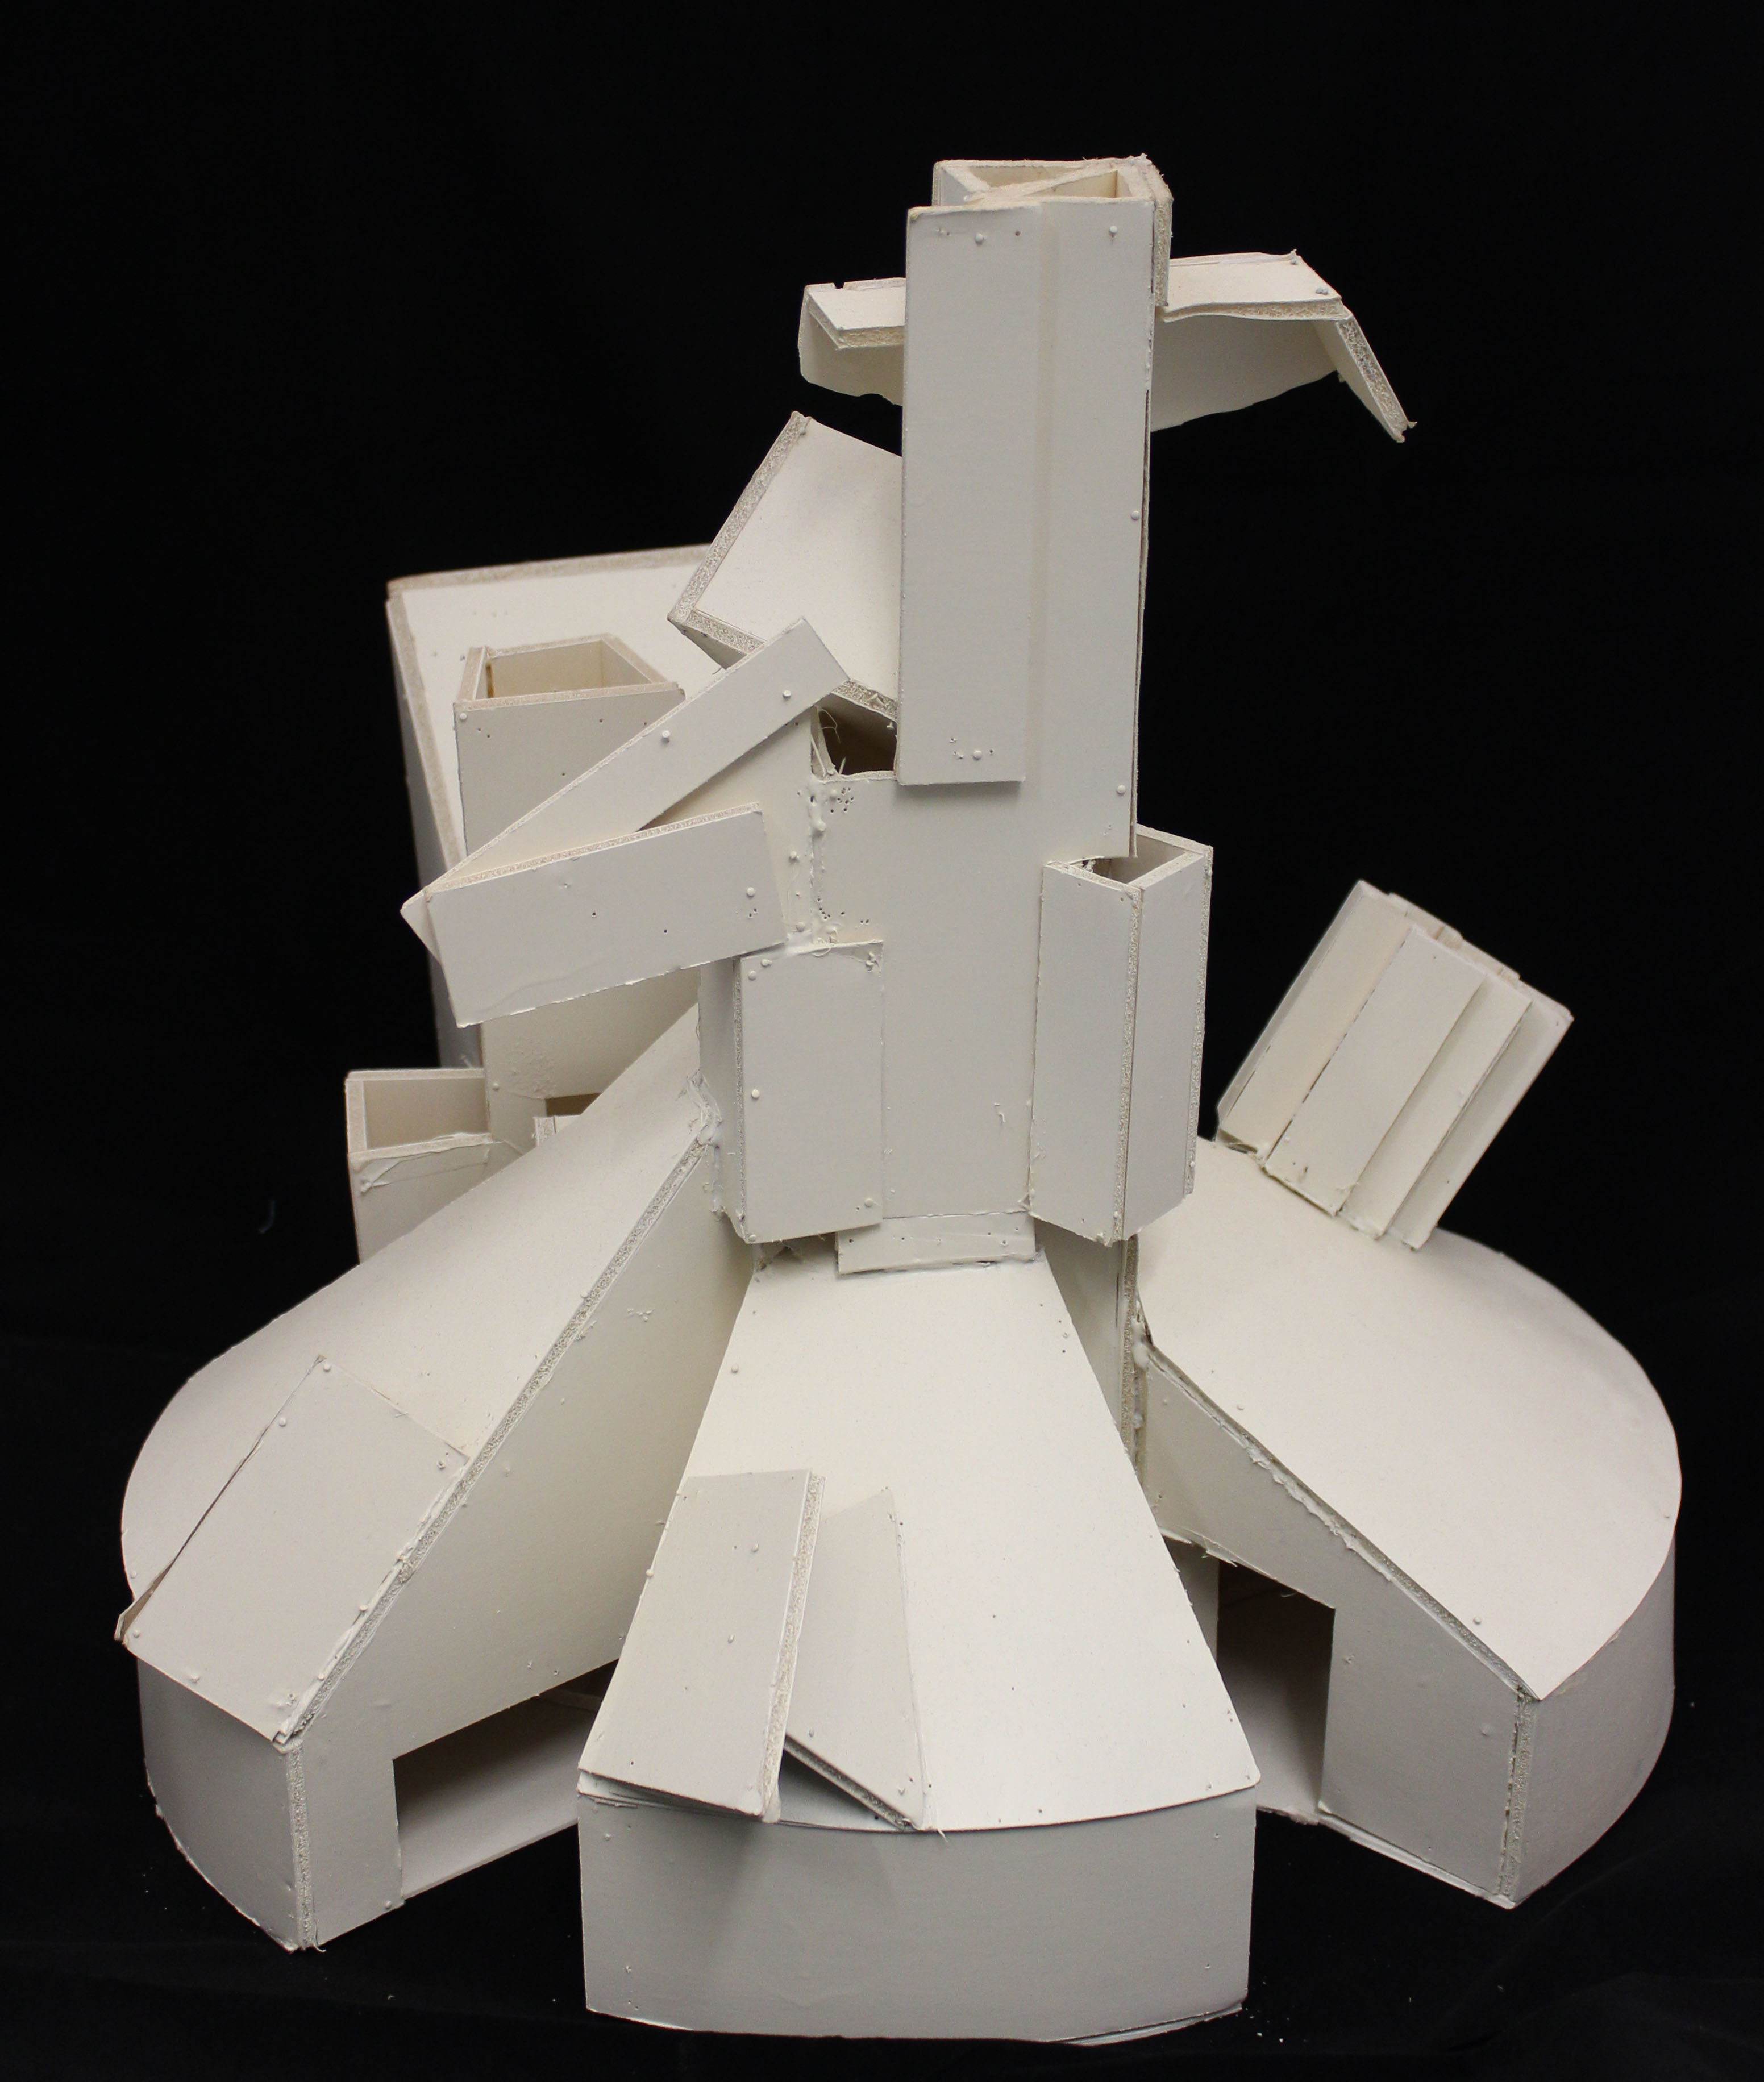 Image: Architectural Model, Sheet Metal Structure, by Frank Gehry, 1987